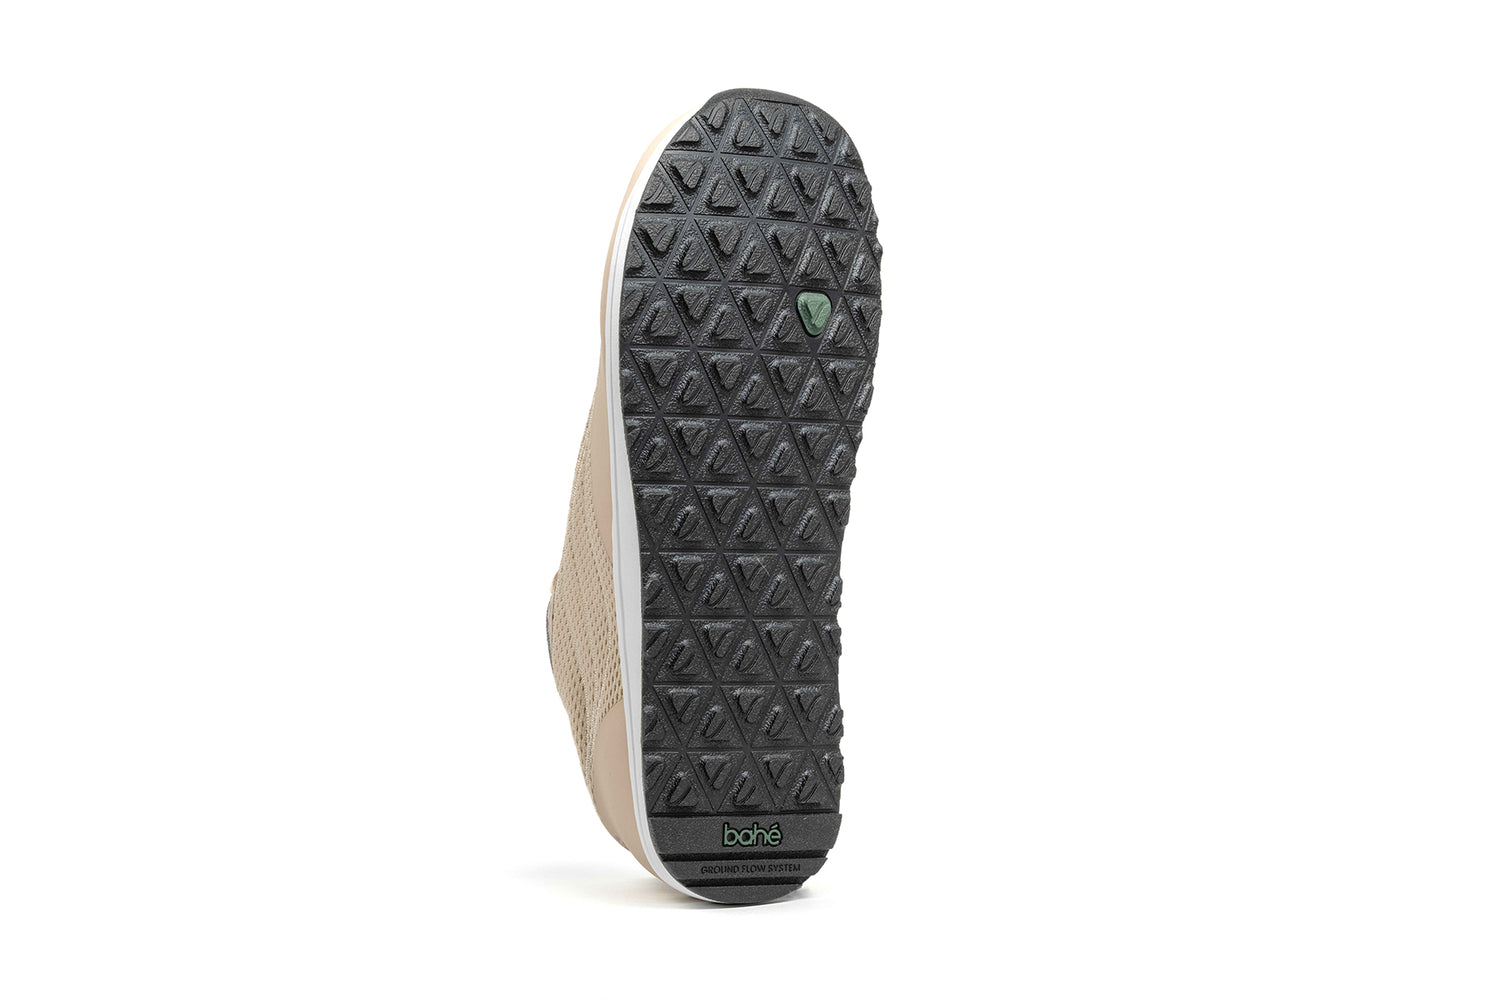 Outsole of Bahé Revive barefoot style grounding shoes in Sandstone (beige)